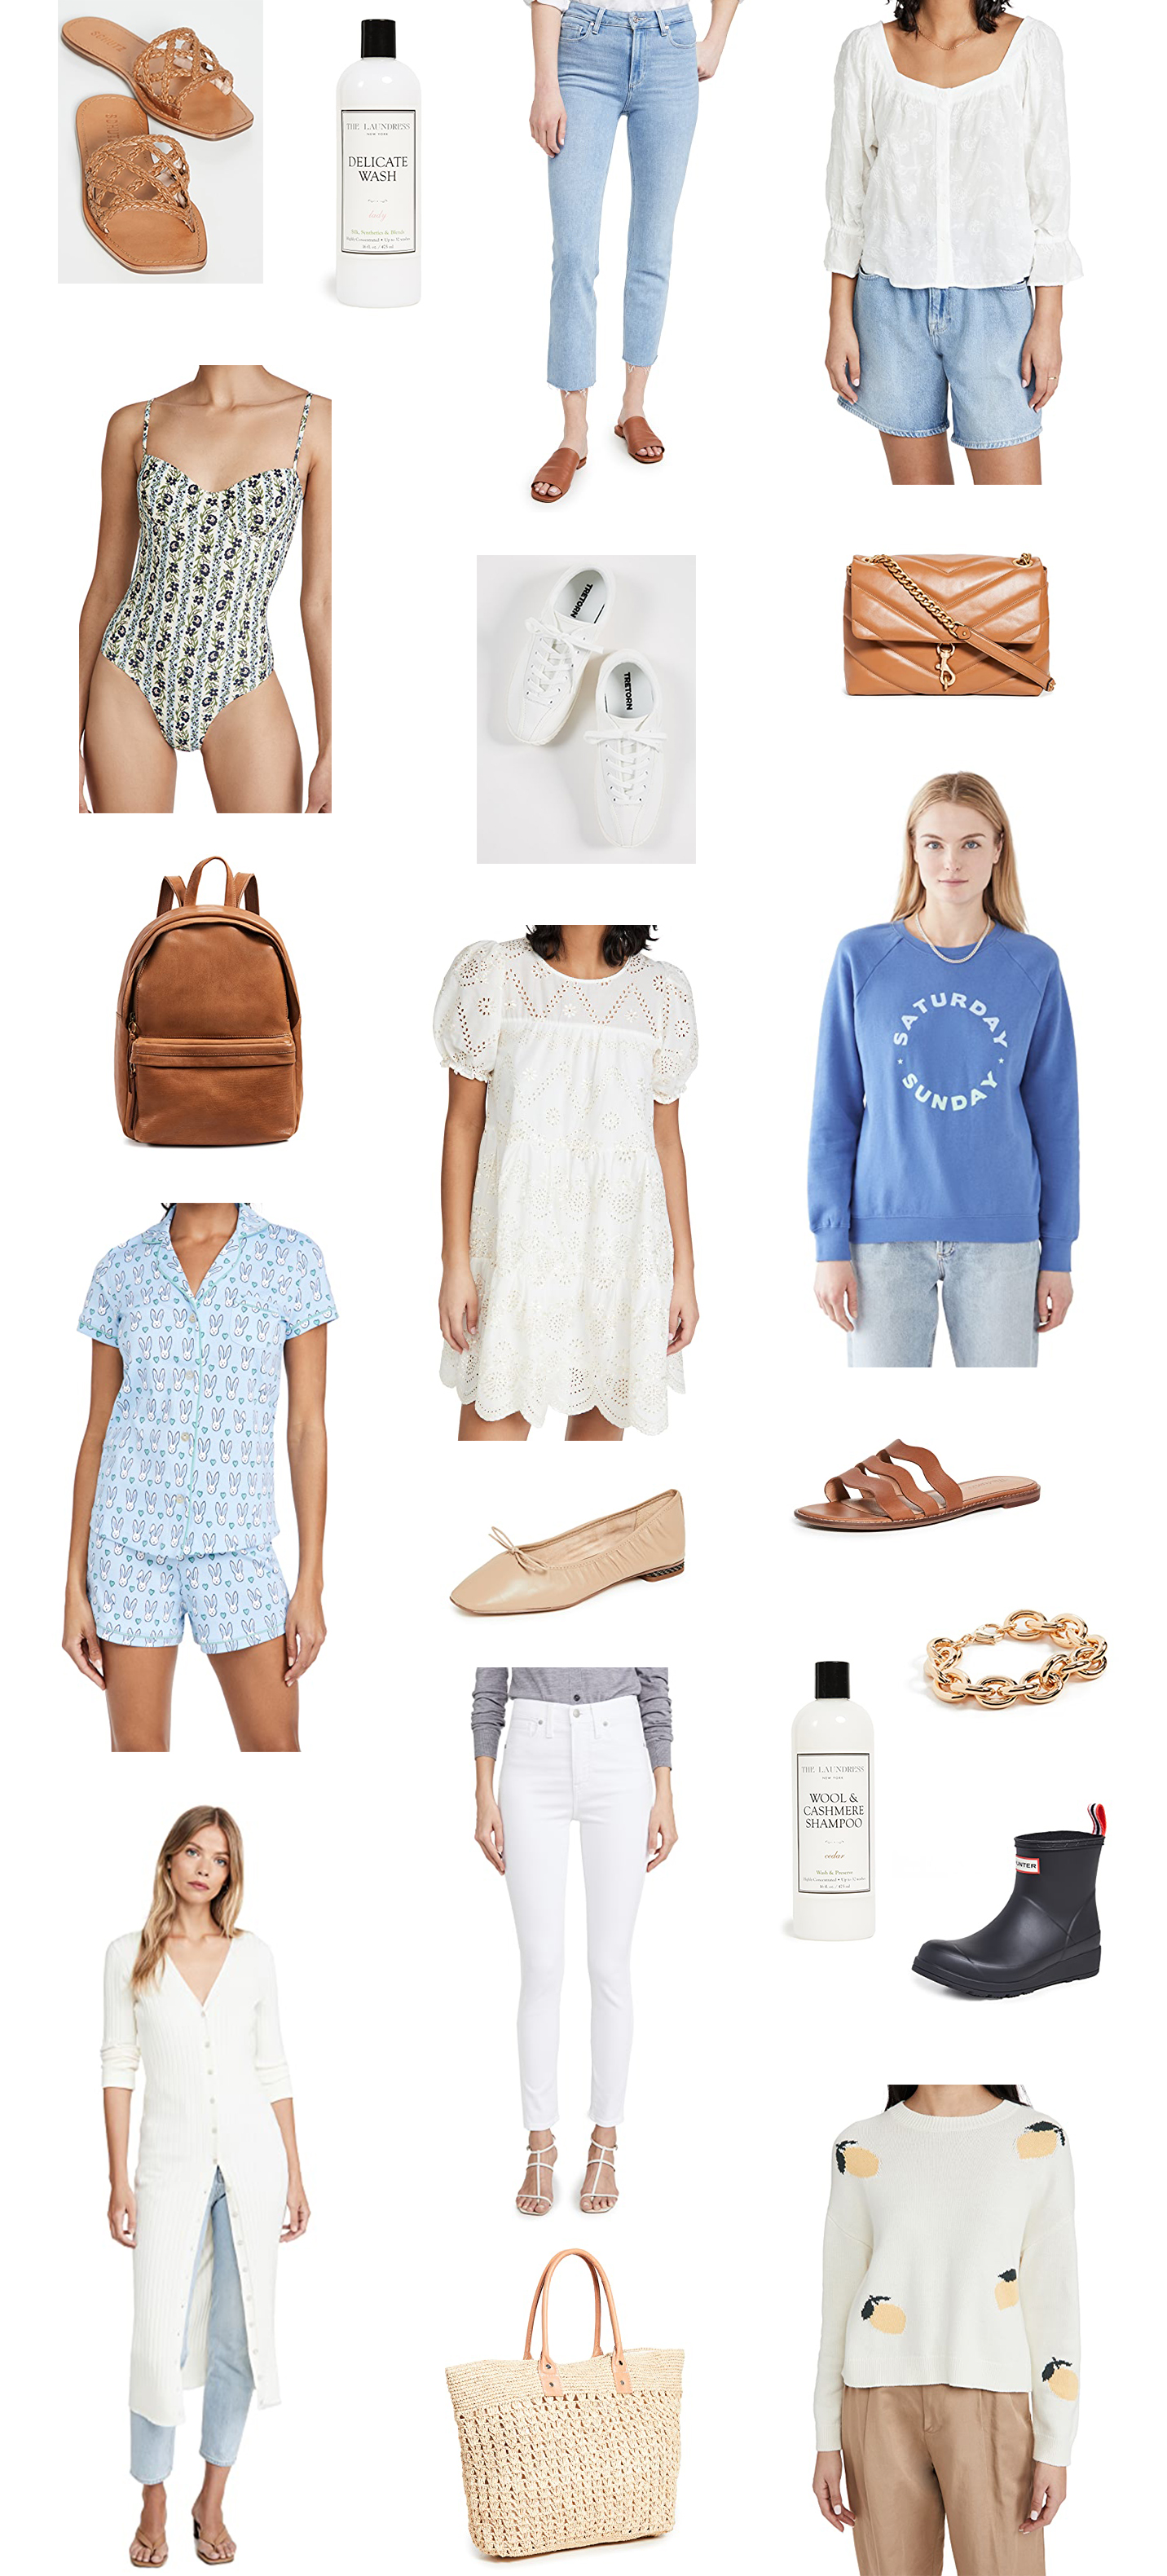 Shopbop Sale: What to Buy